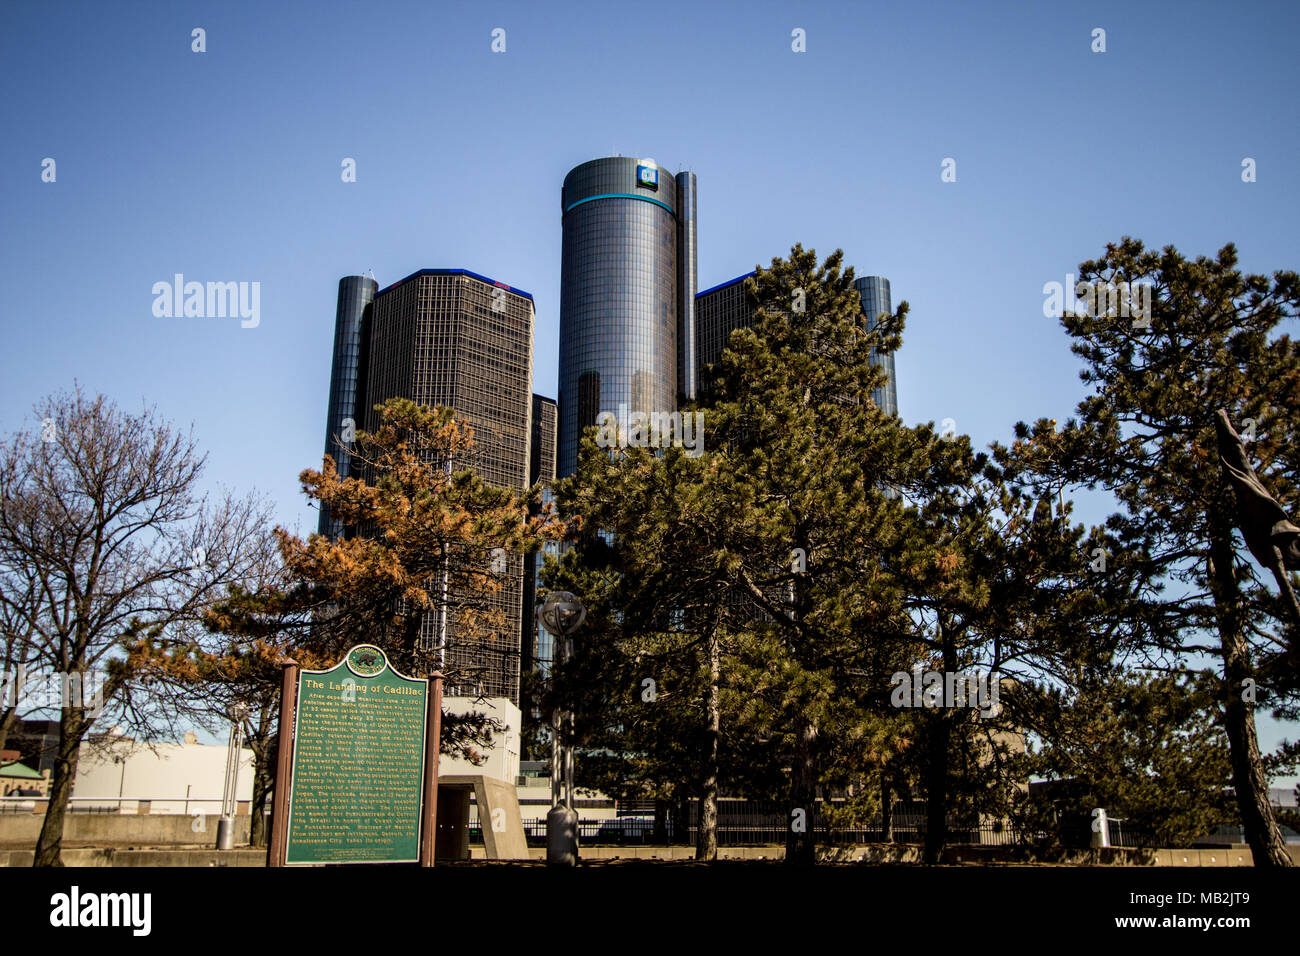 Exterior of the Renaissance Center towers with historical marker about the founding father of Detroit, the French explorer Cadillac. Stock Photo